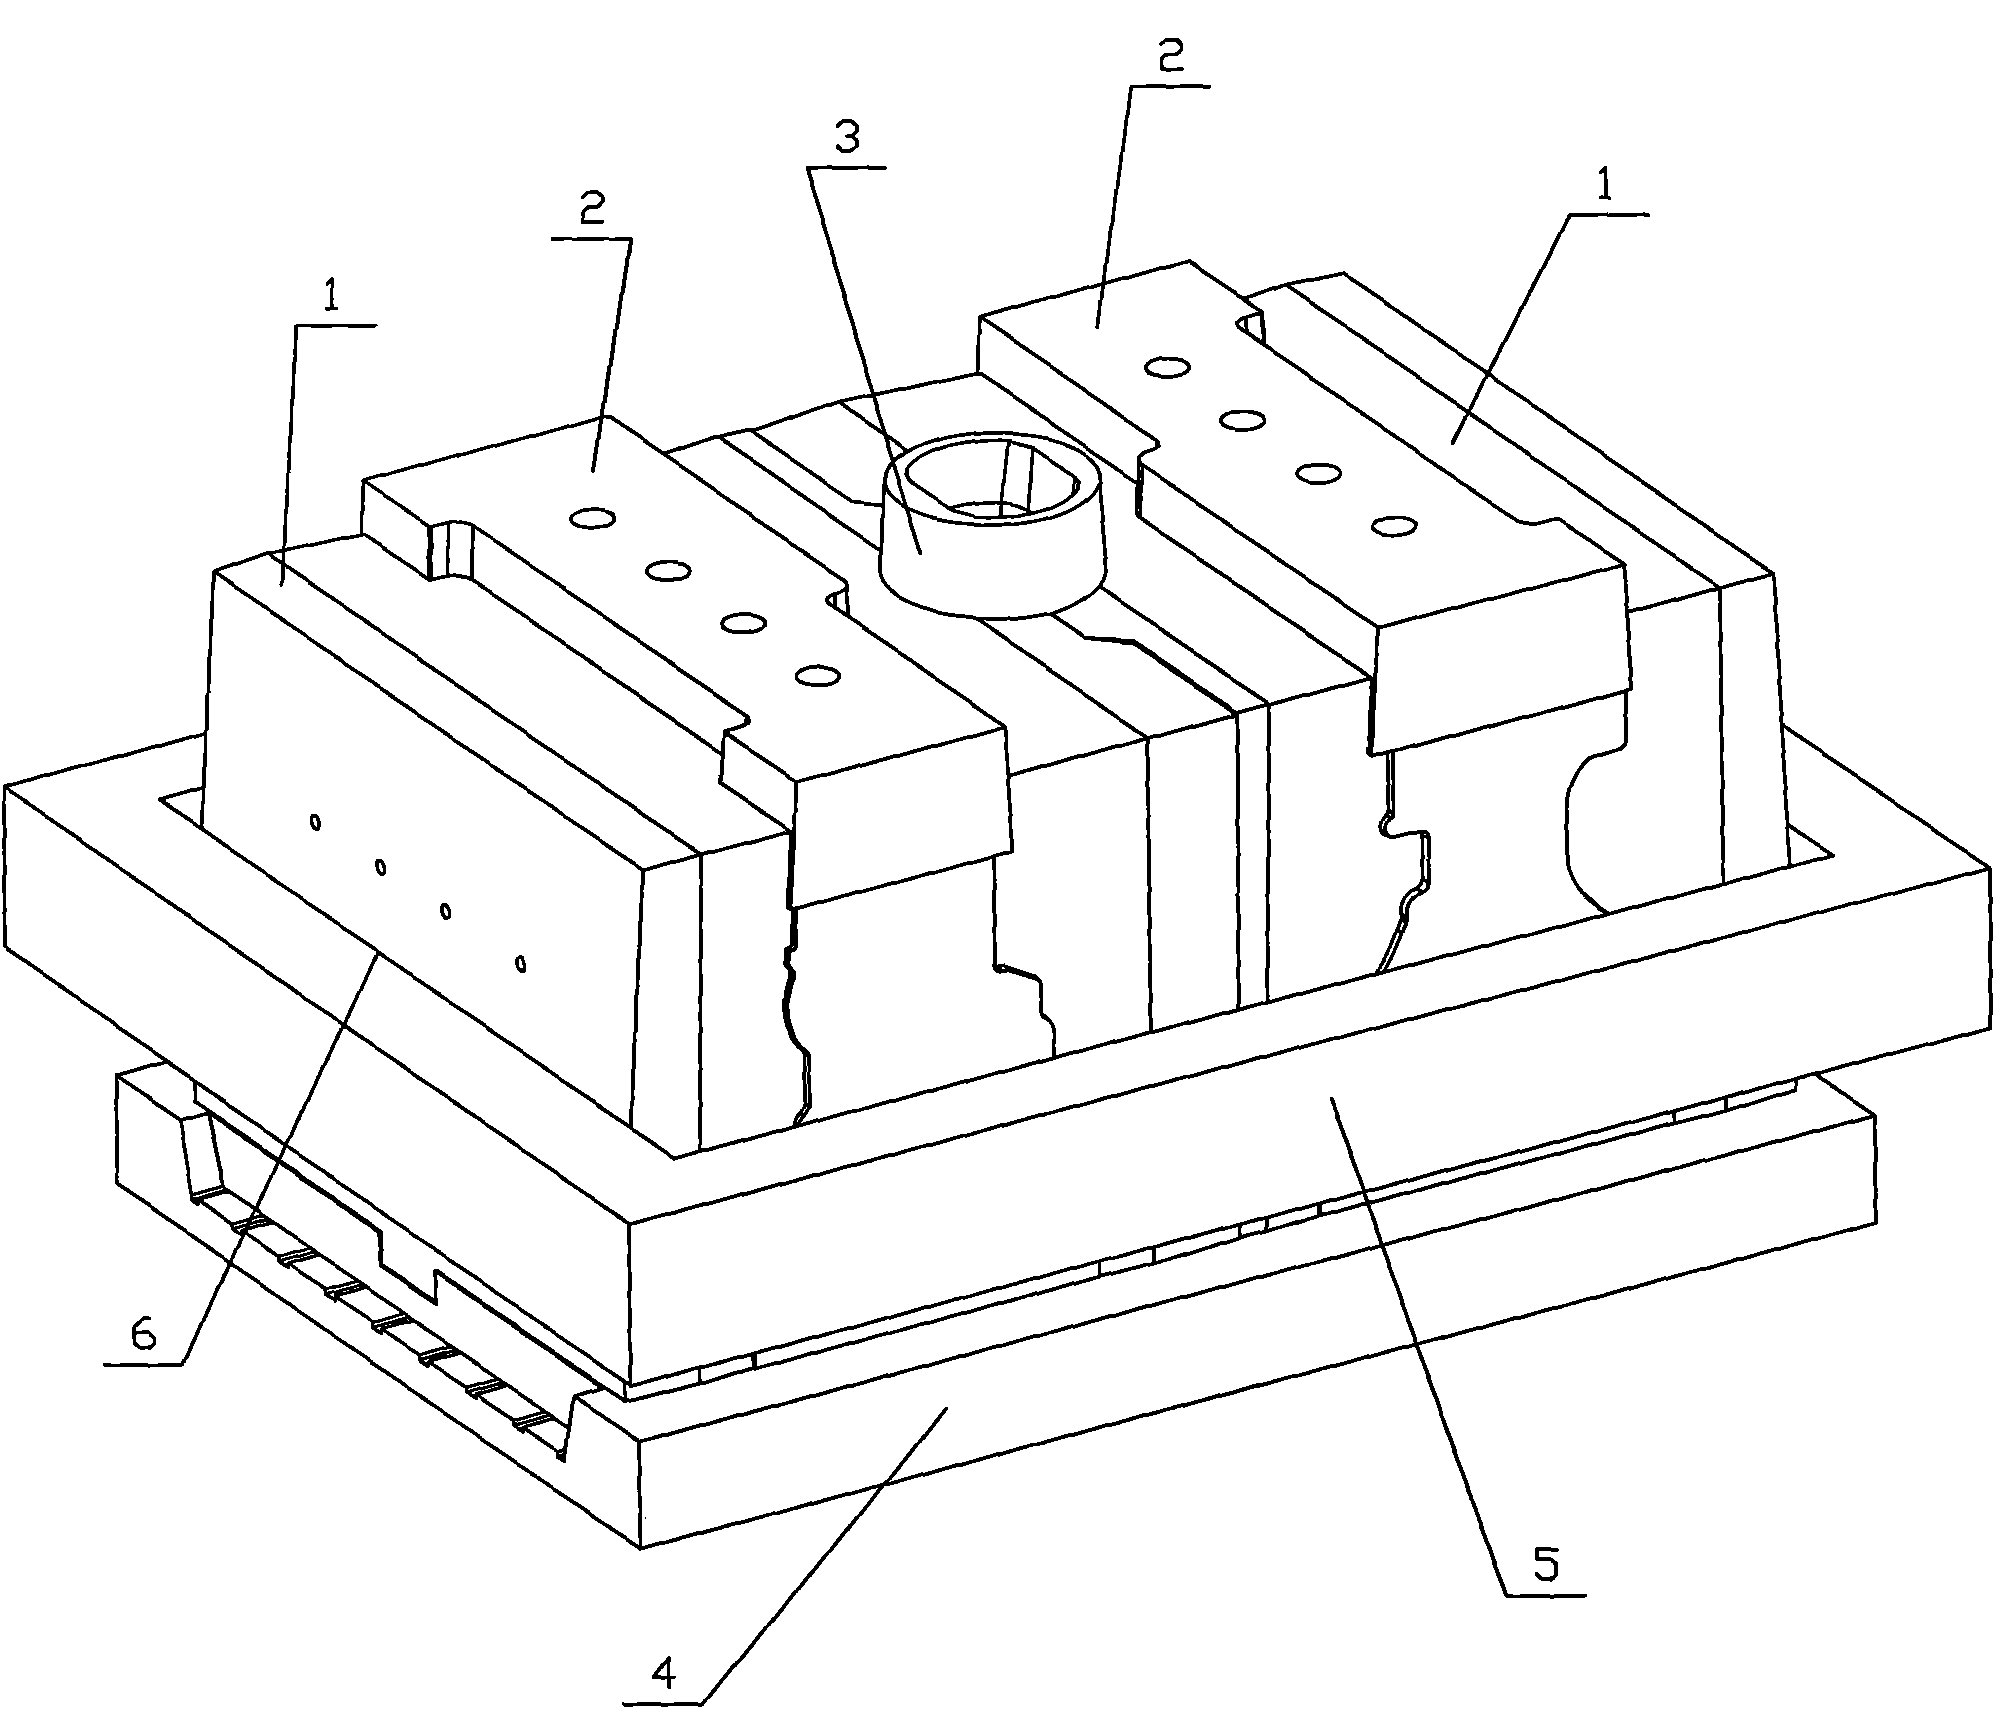 Core assembly pouring device for cylinder block casting in automobile engine